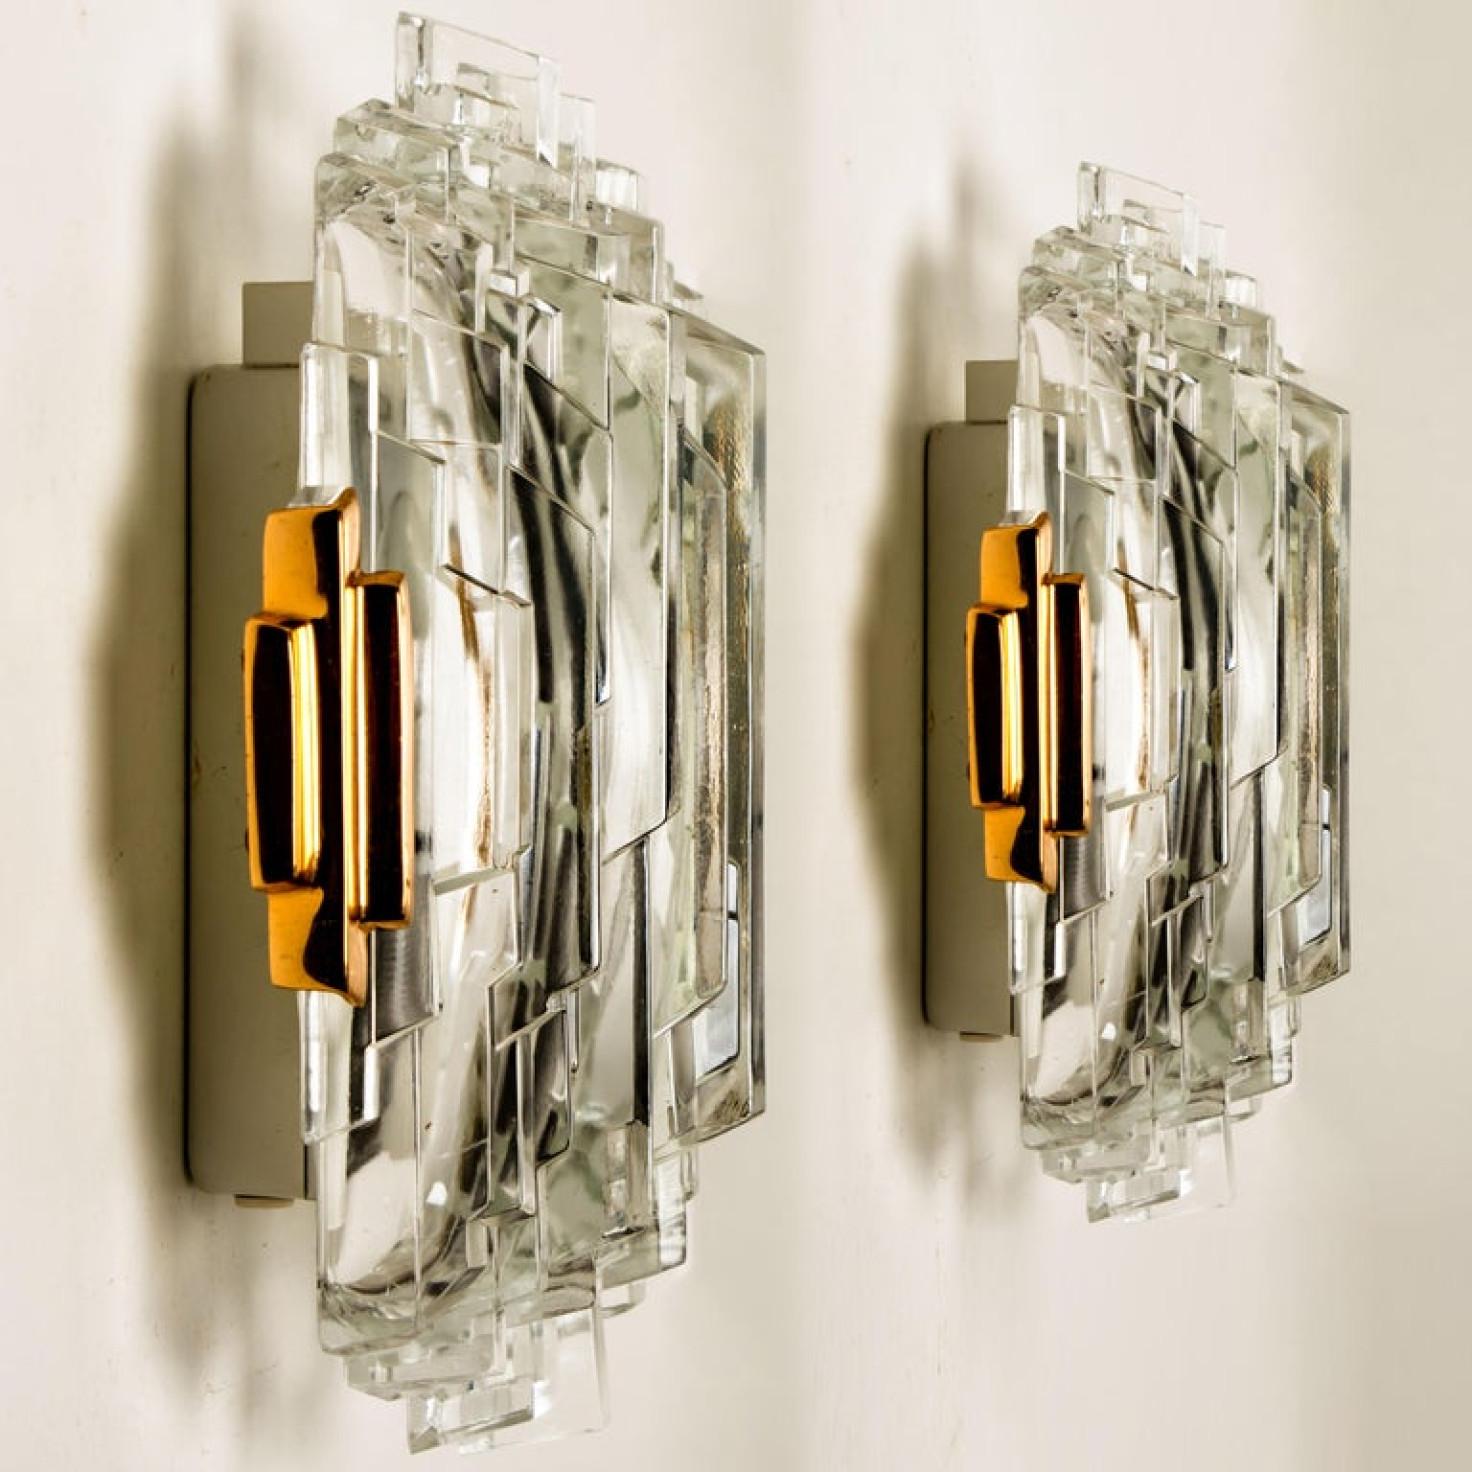 Pair of of Icicle Glass Wall Sconces /Lights, 1960s For Sale 2